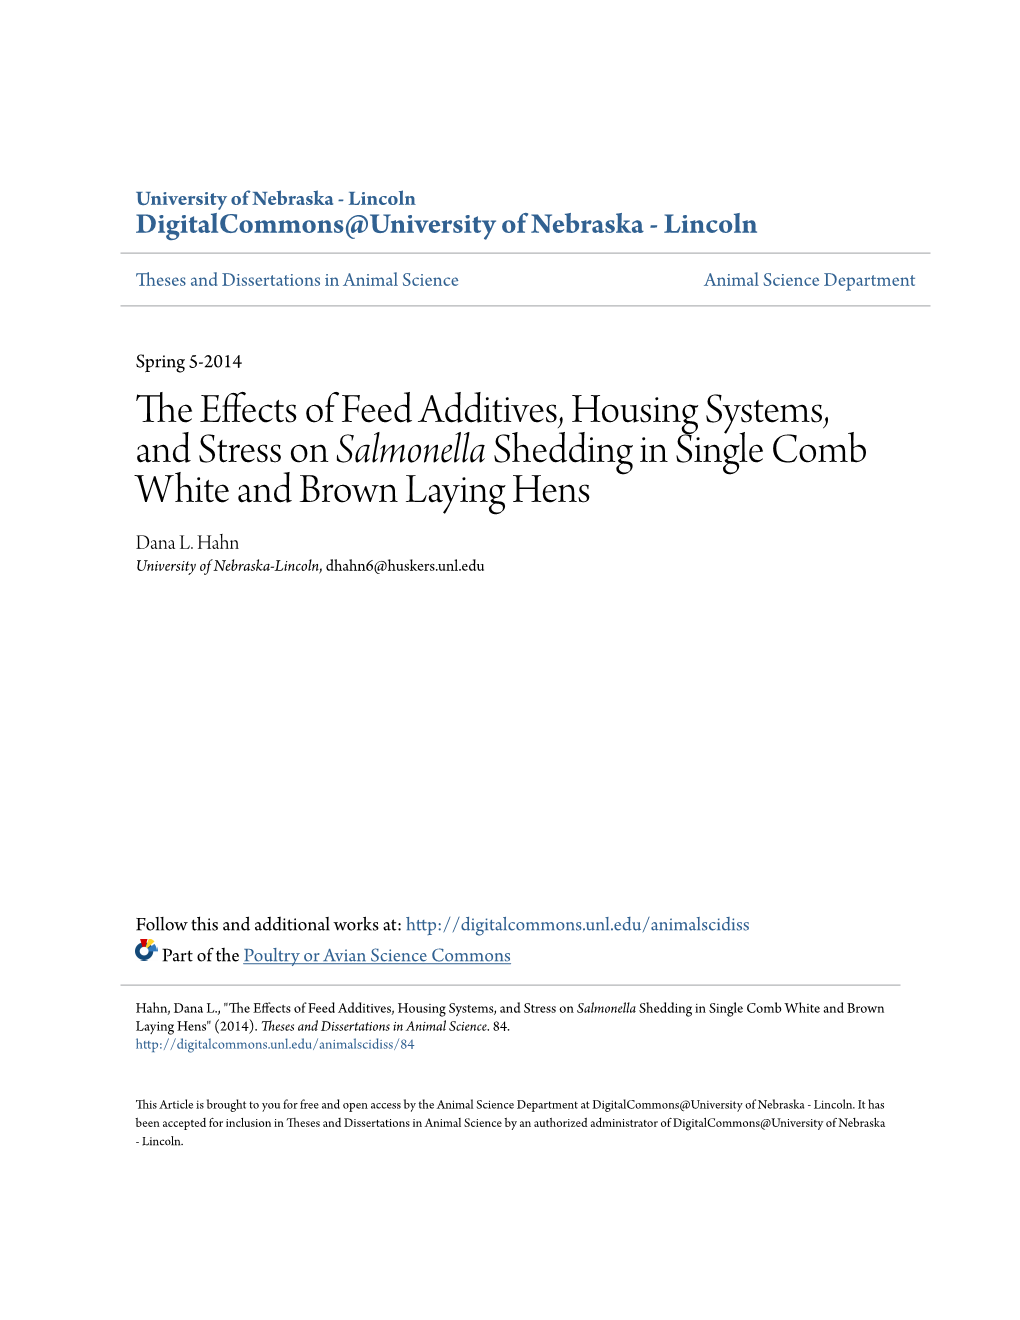 The Effects of Feed Additives, Housing Systems, and Stress on &lt;I&gt;Salmonella&lt;/I&gt; Shedding in Single Comb White and Br